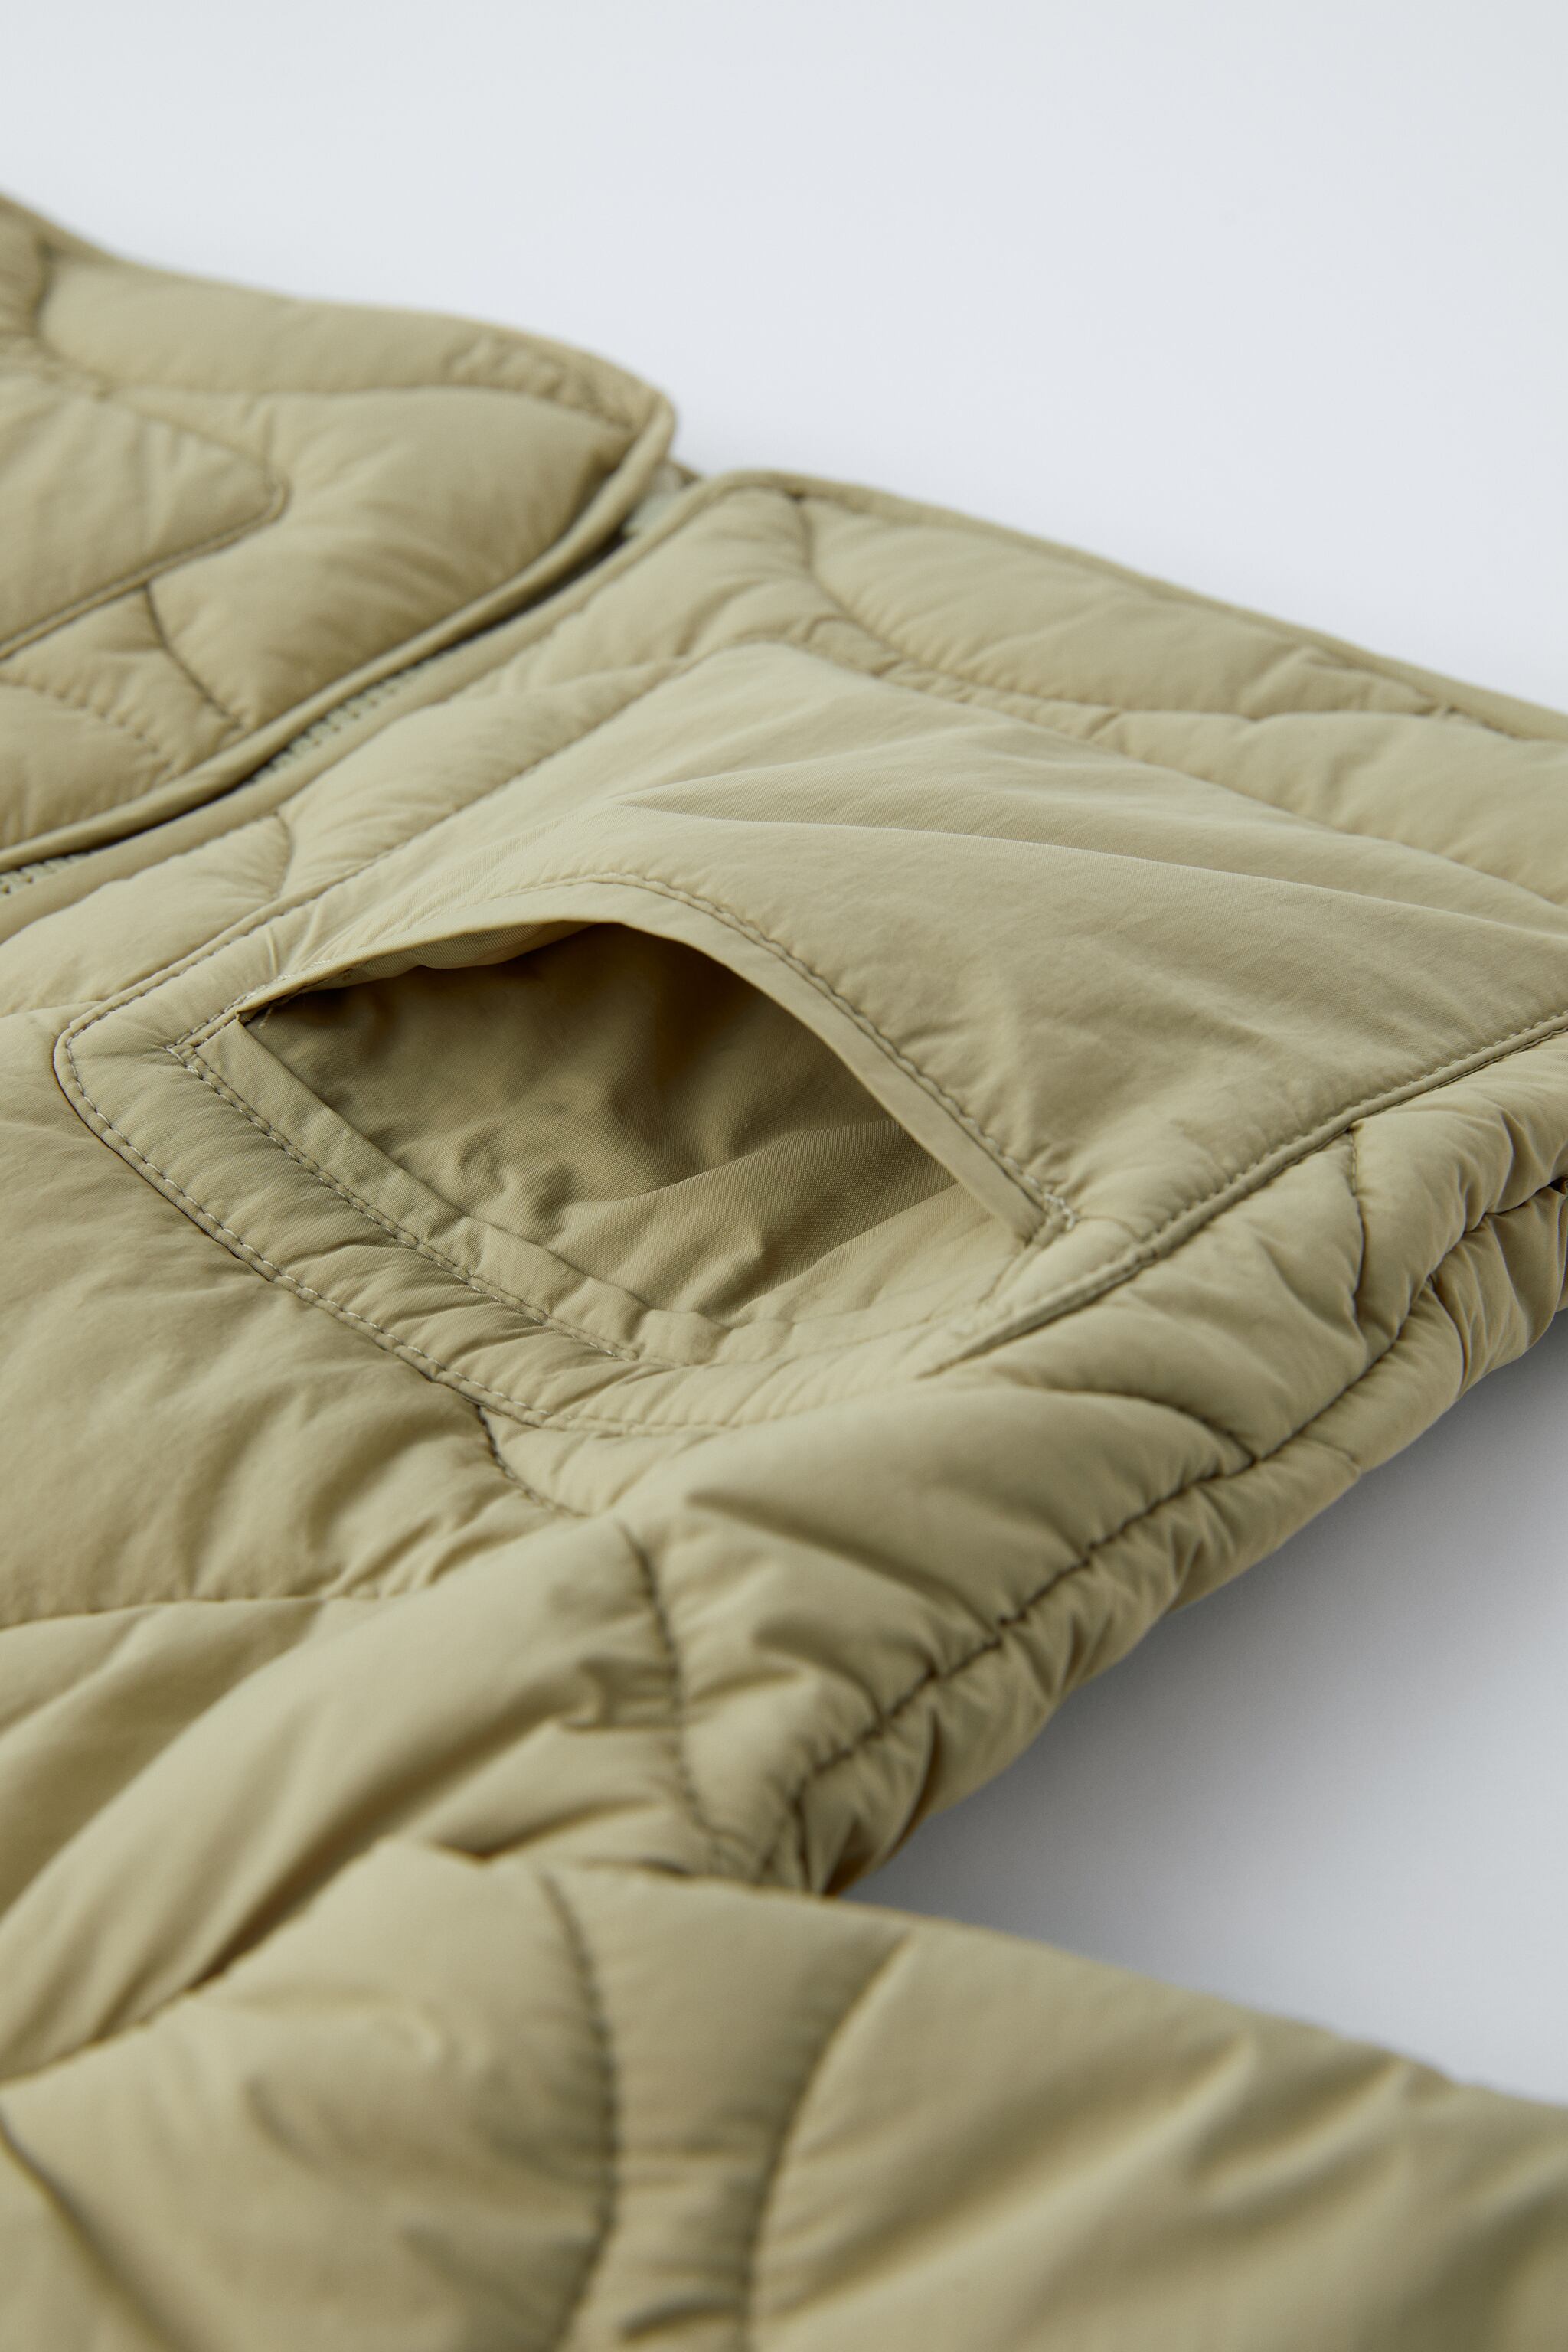 HOODED QUILTED JACKET